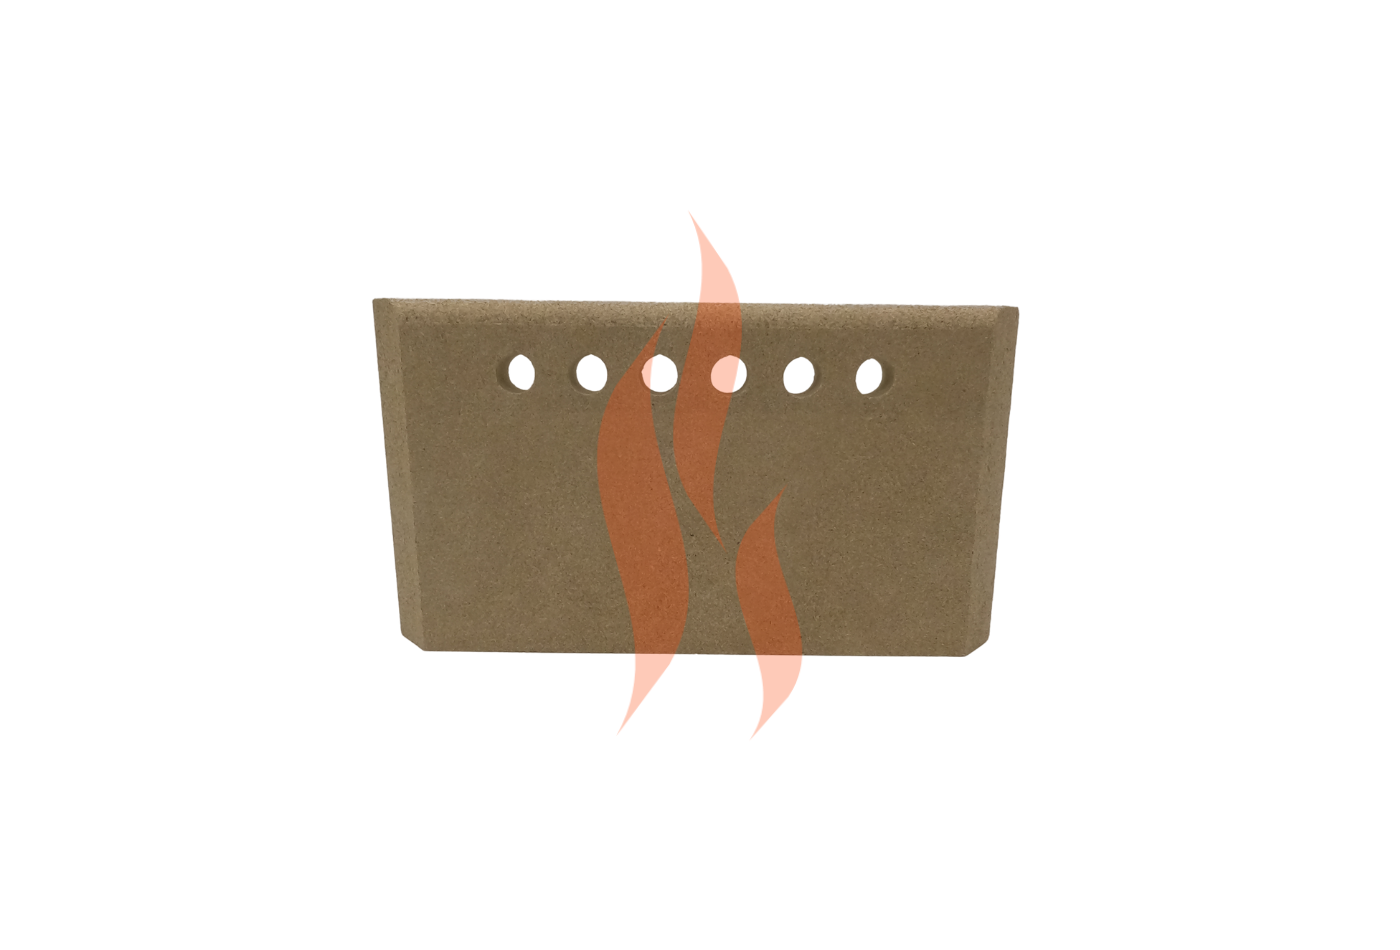 'Fireline FX5 V3' - Back Vermiculite Fire Bricks | Replacement Stove Parts